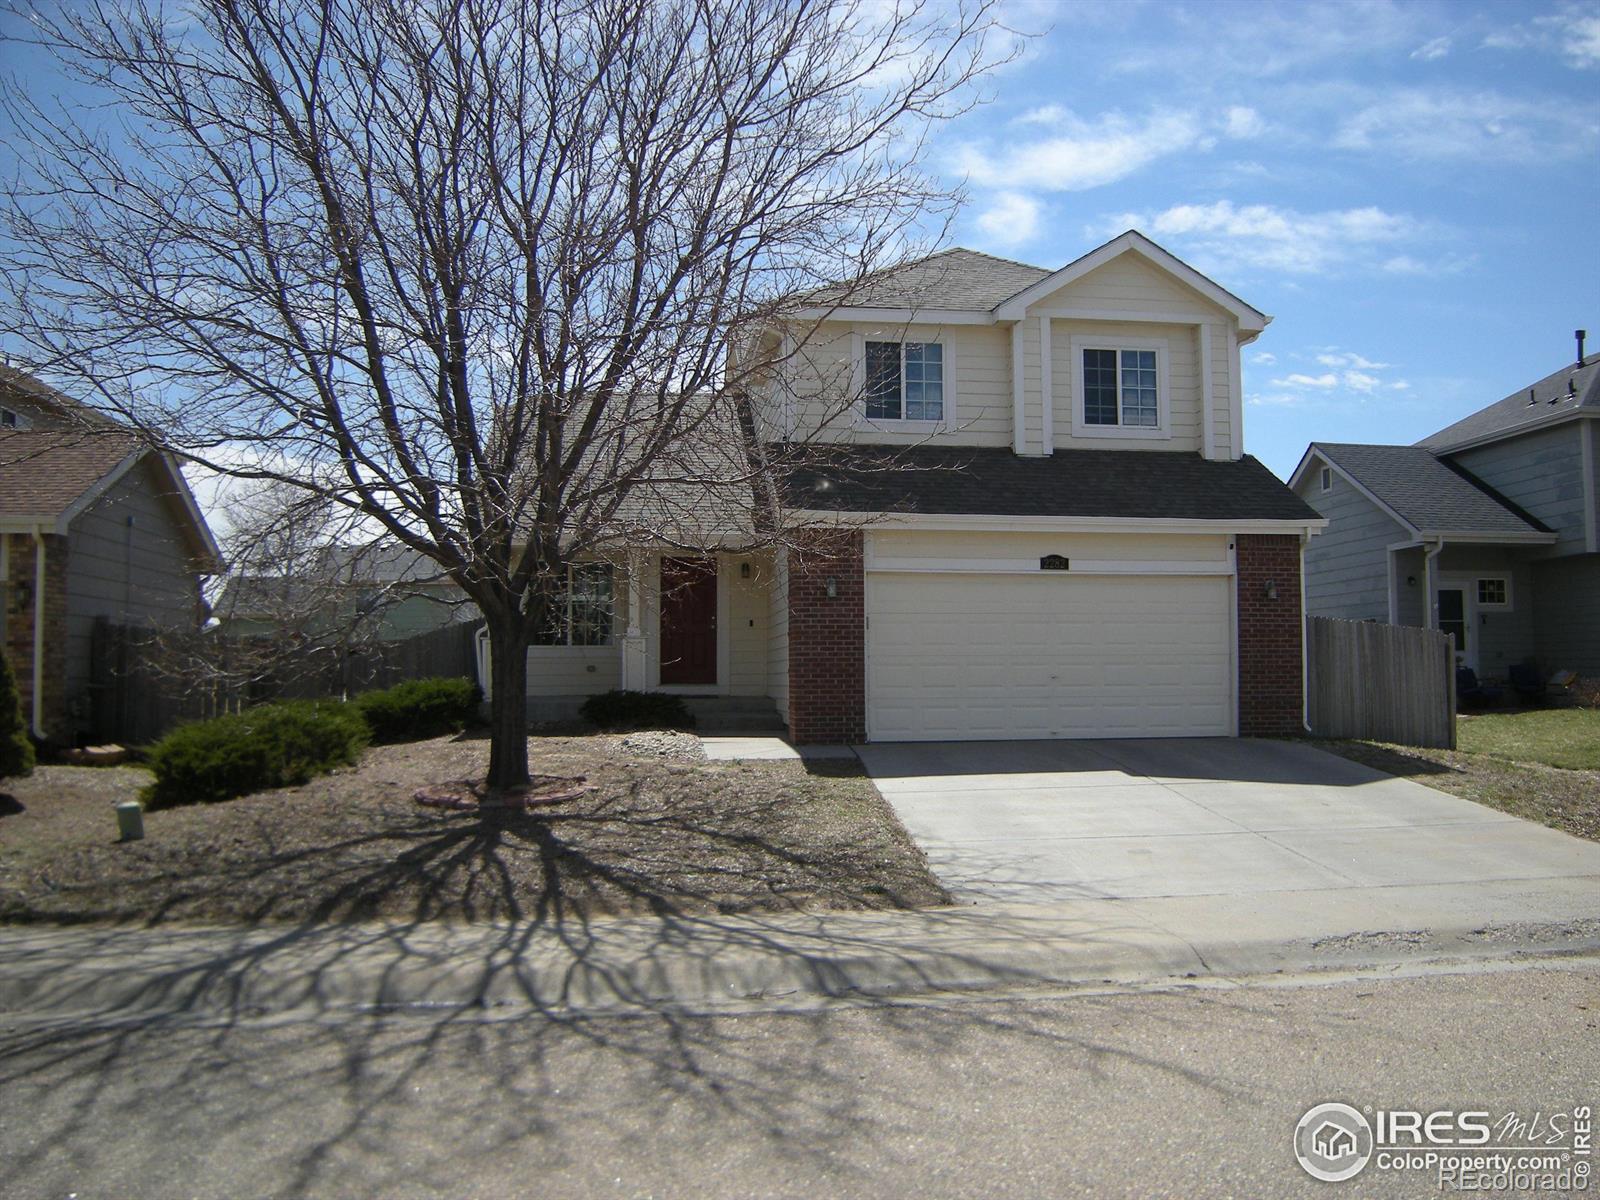 2282  stage coach drive, Milliken sold home. Closed on 2024-04-30 for $385,000.